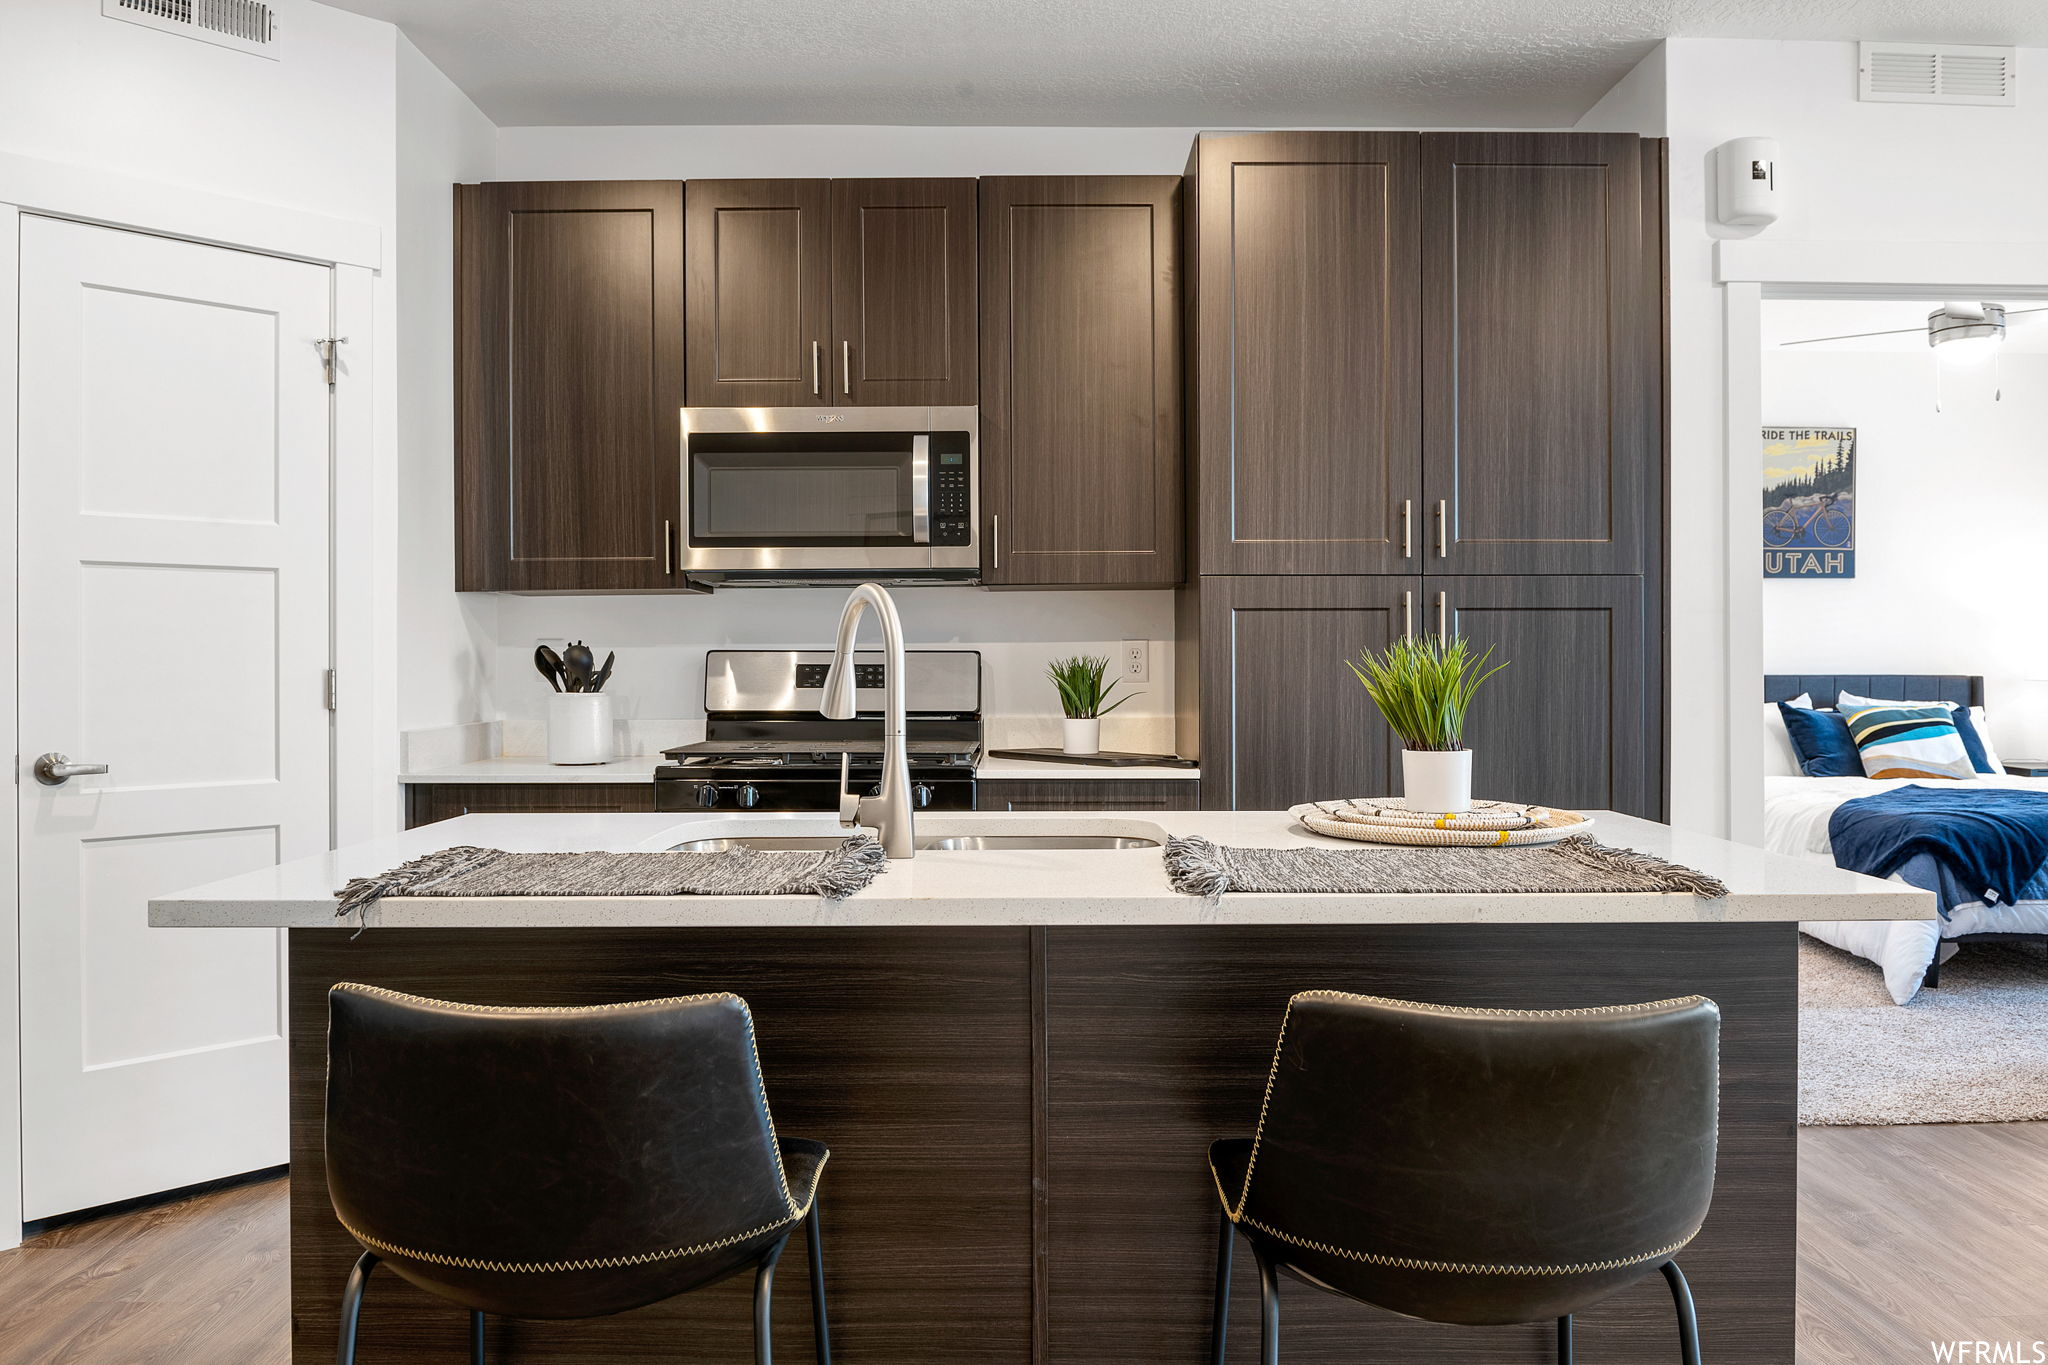 Kitchen with stainless steel appliances, a center island, light countertops, dark brown cabinets, and light hardwood floors